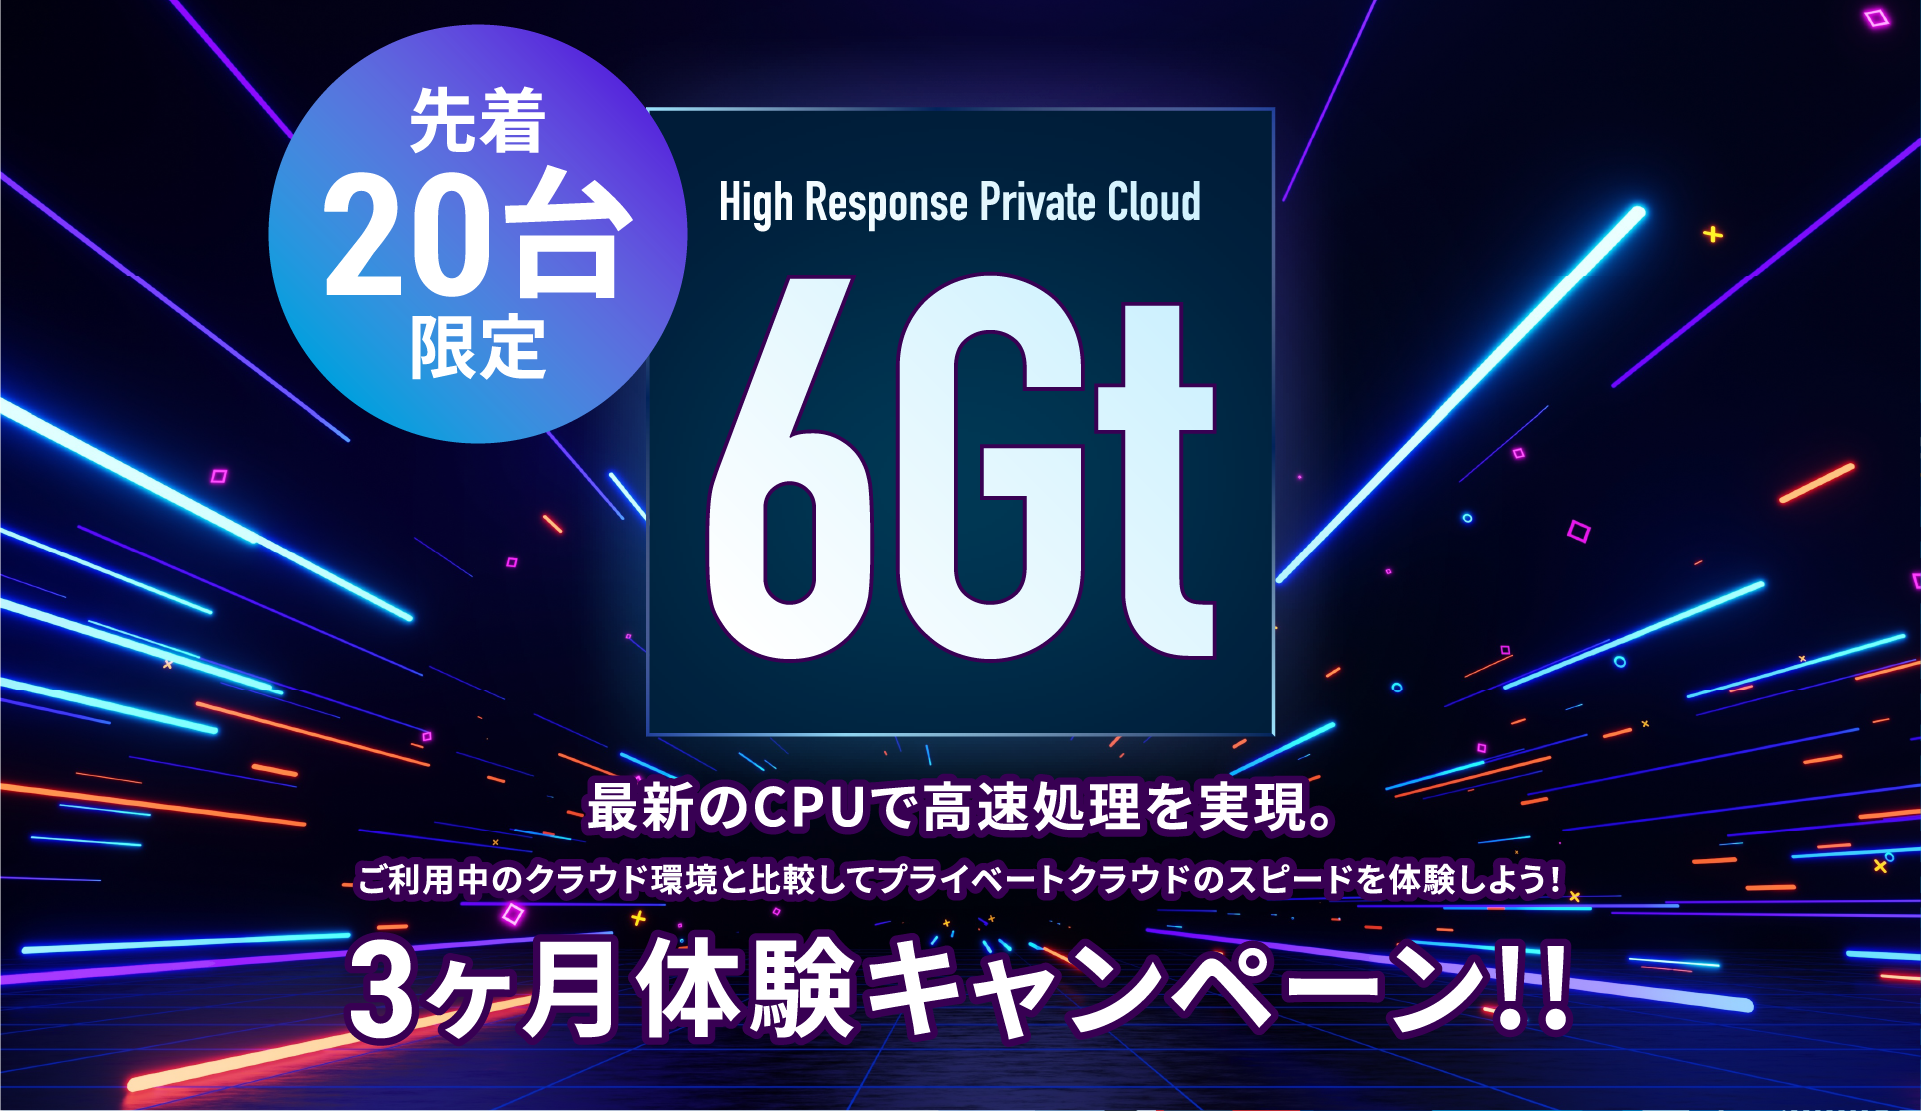 High Response Private Cloud 6Gt Trial